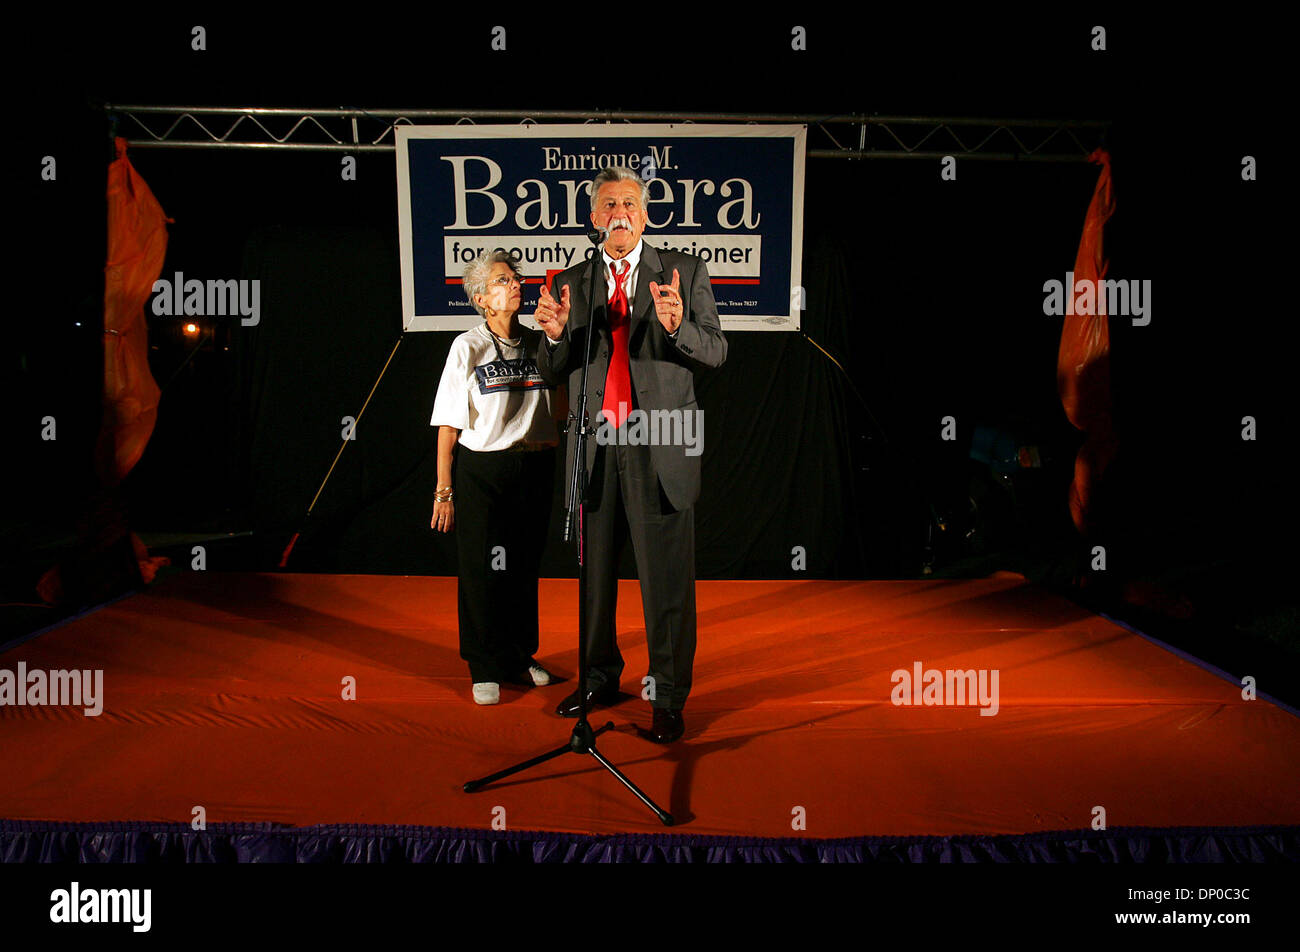 Mar 07, 2006; San Antonio, TX, USA; Texas Primary Elections 2006: With his wife, Leticia, at his side, County commissioner, Pct. 2 candidate Enrique Barrera gives a concession speach Tuesday, March 7, 2006 at his campaign headquarters. Barrera lost his bid to incumbent Paul Elizondo. Mandatory Credit: Photo by BM Sobhani/San Antonio Express-News/ZUMA Press. (©) Copyright 2006 by Sa Stock Photo